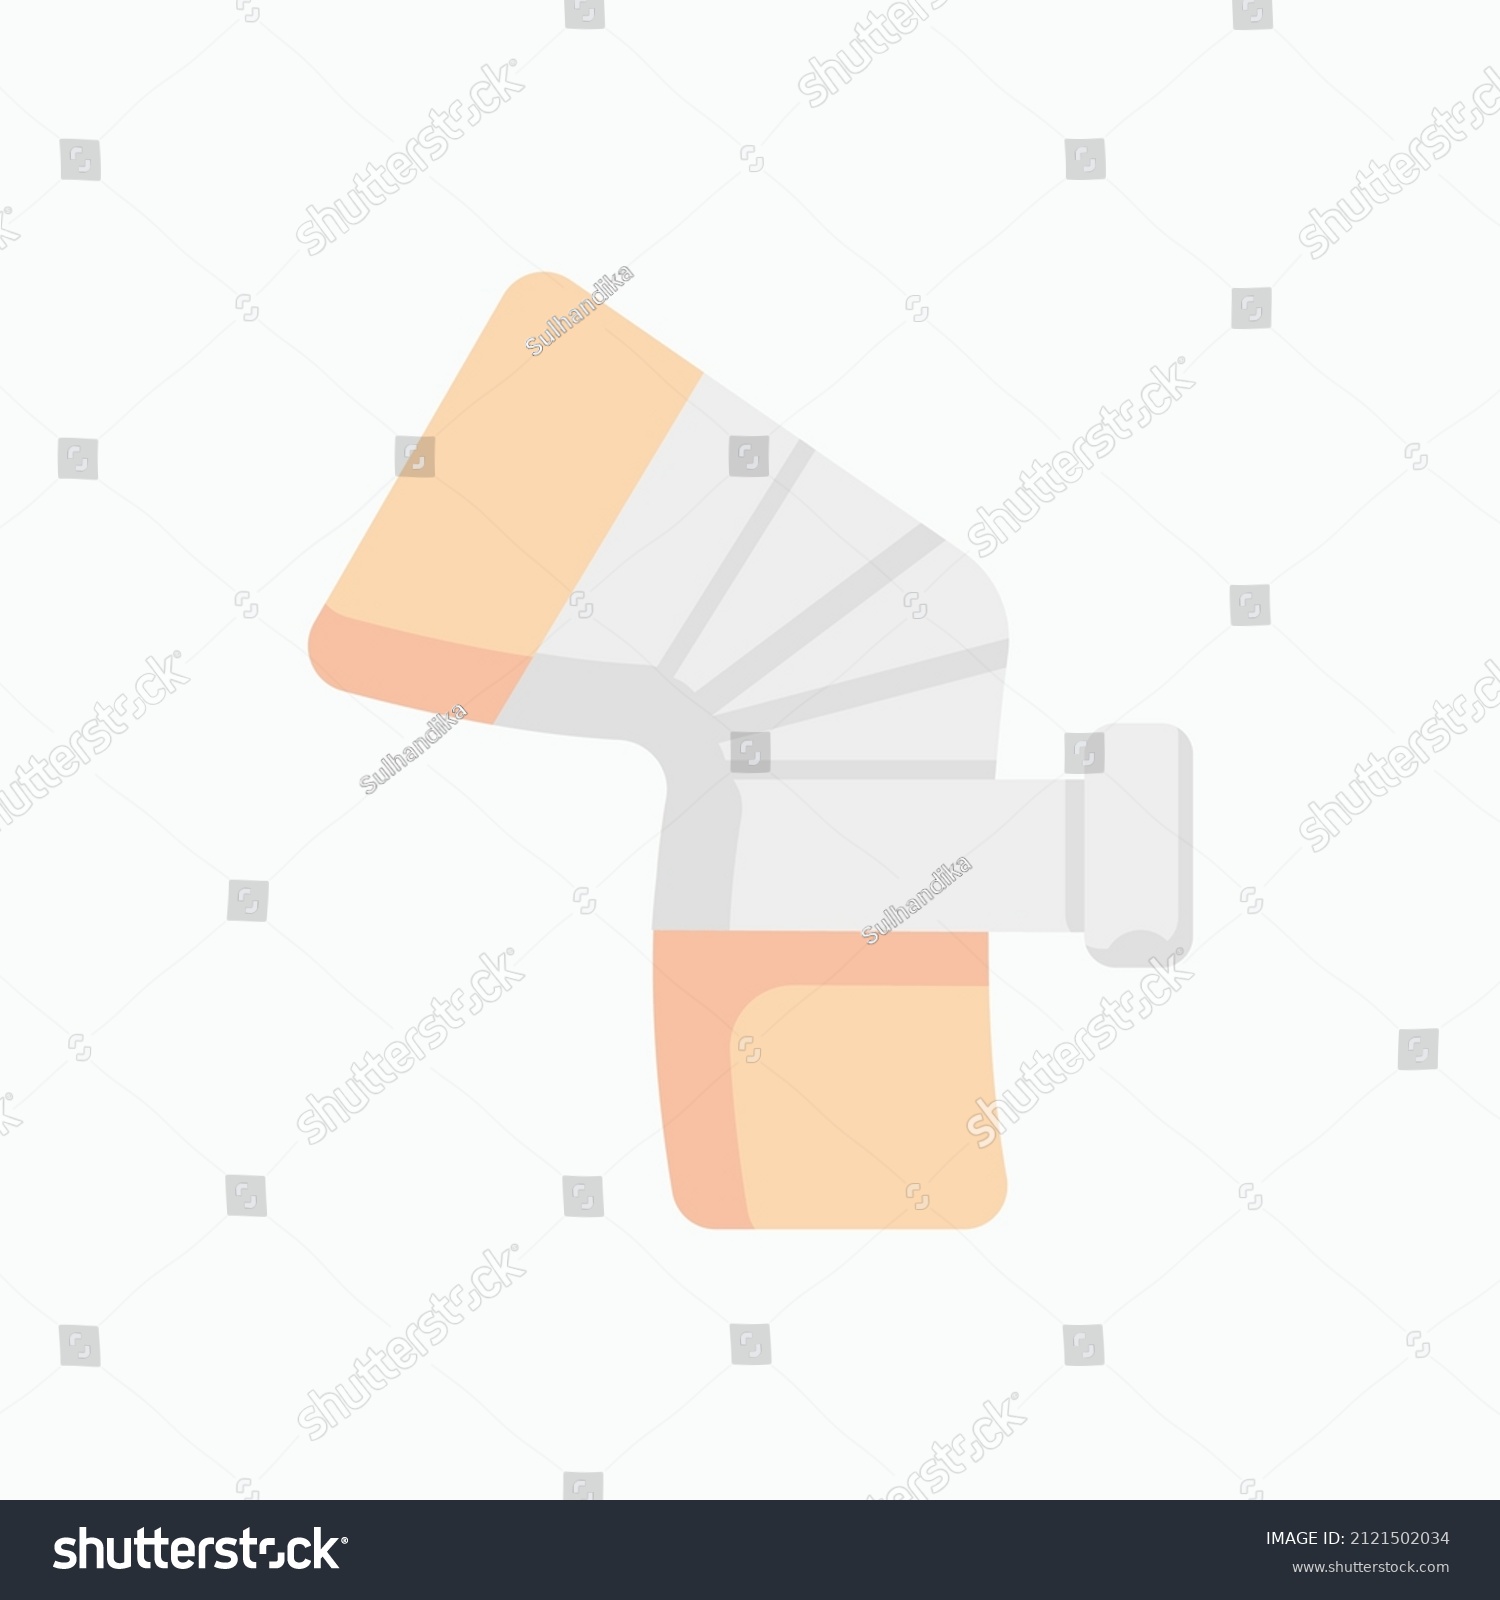 SVG of knee wound and injury bandage flat icon, medical icon svg